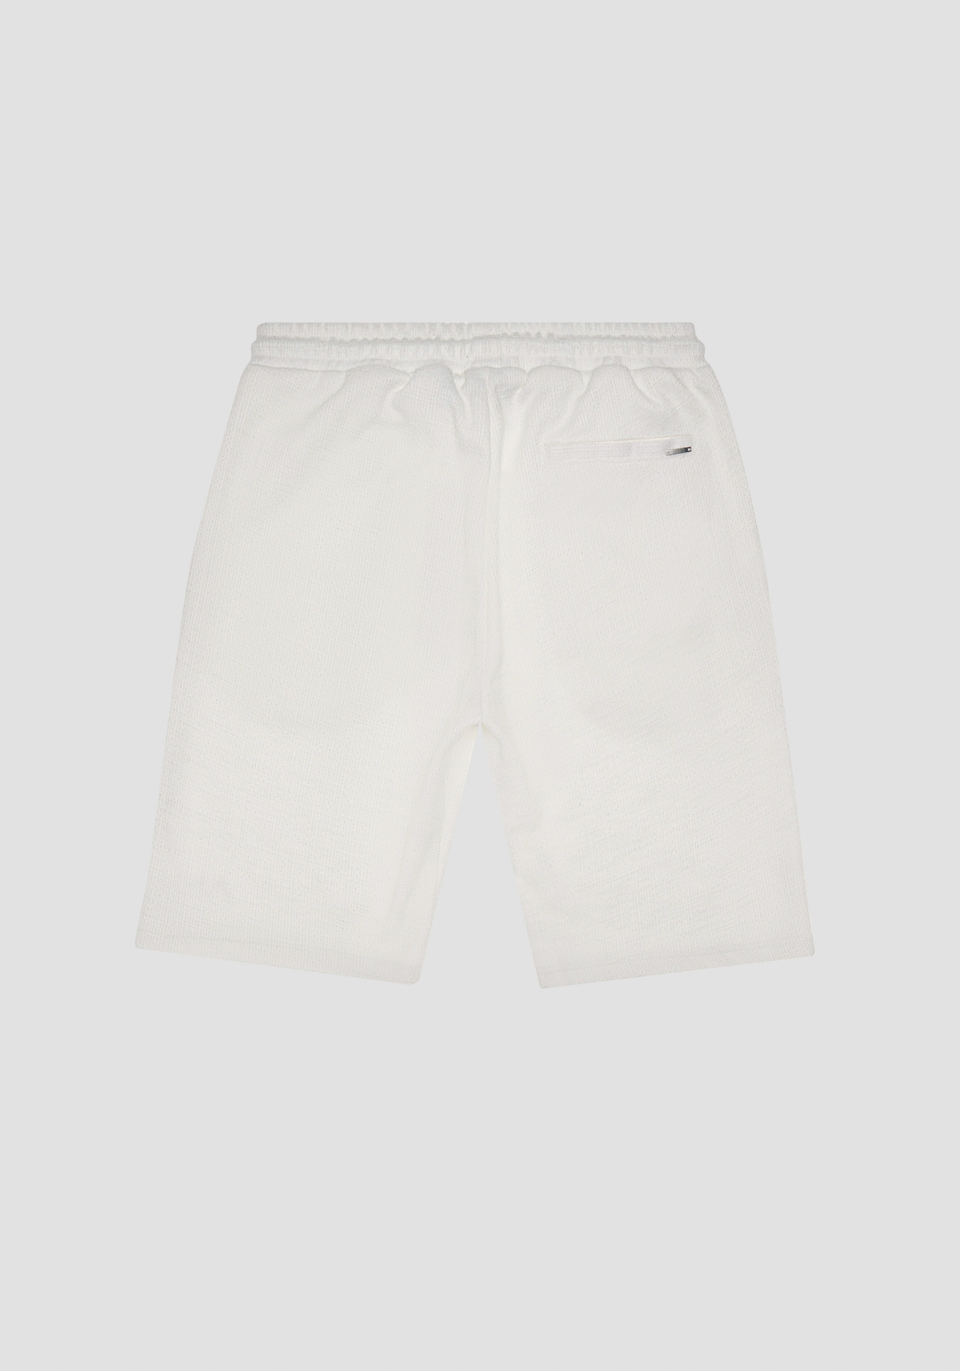 REGULAR FIT SHORTS IN COTTON BLEND FABRIC WITH EMBROIDERED MONOGRAM - Antony Morato Online Shop